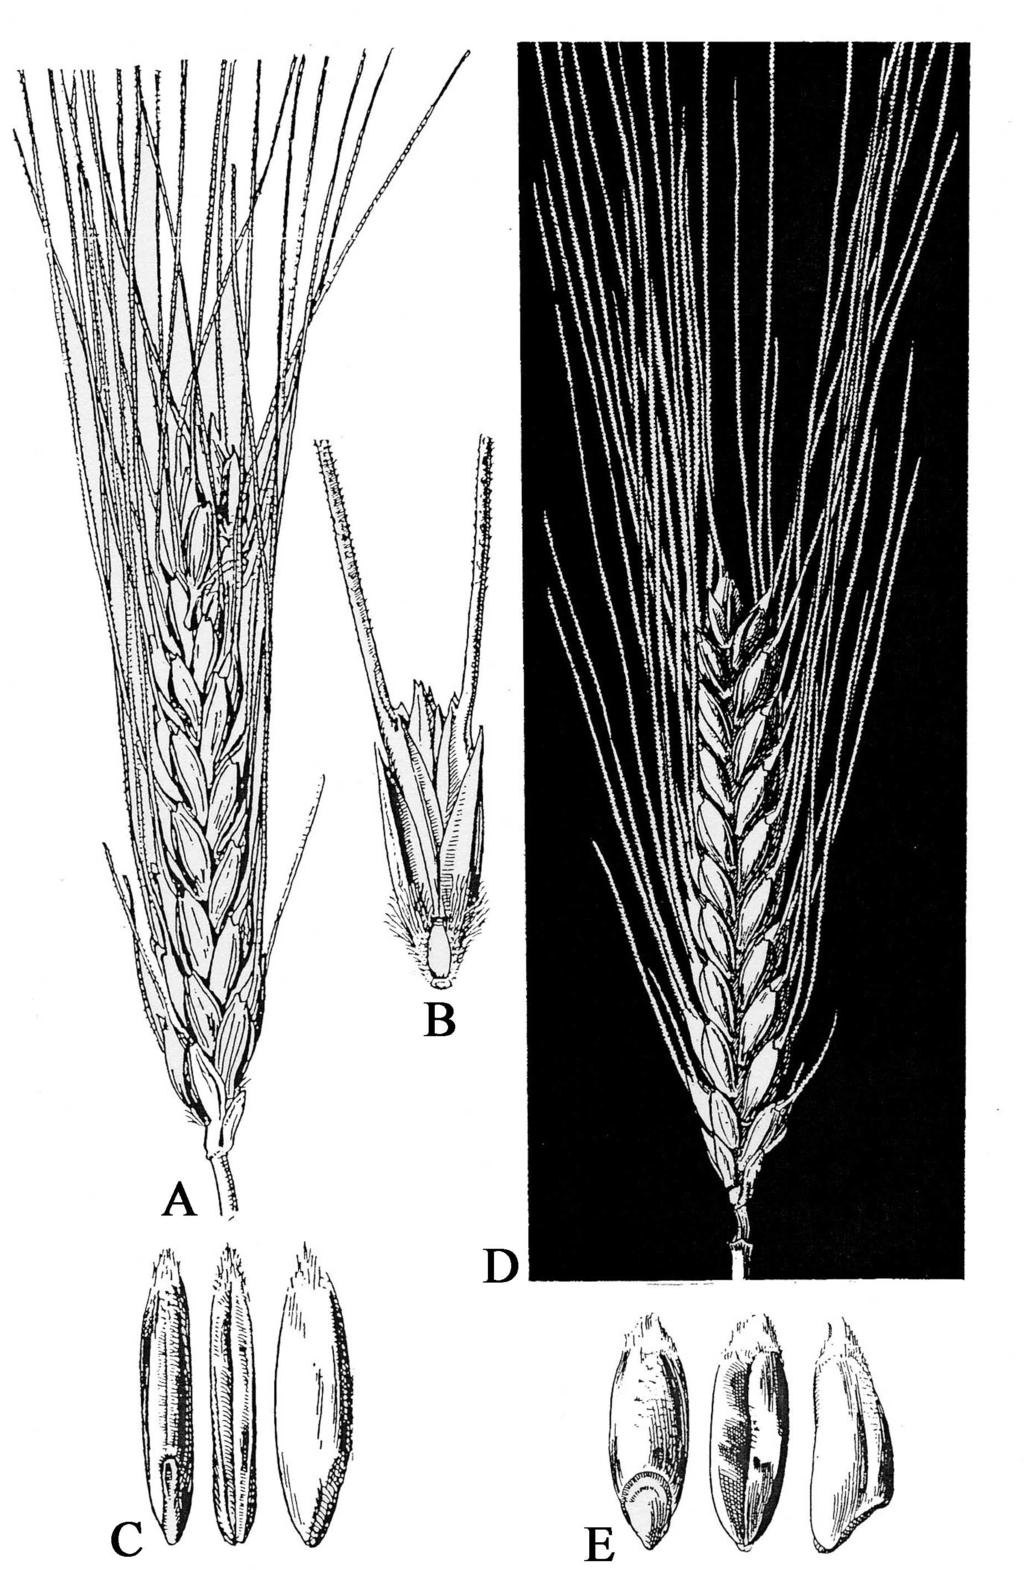 1.2 Cytogenetic and Taxonomic Background 5 Fig. 1.1A D. Tetraploid Triticum turgidum wheat. A Ear (1:1), B spikelet (2:1), C grain (3:1) of wild emmer wheat, T. turgidum subsp. dicoccoides.